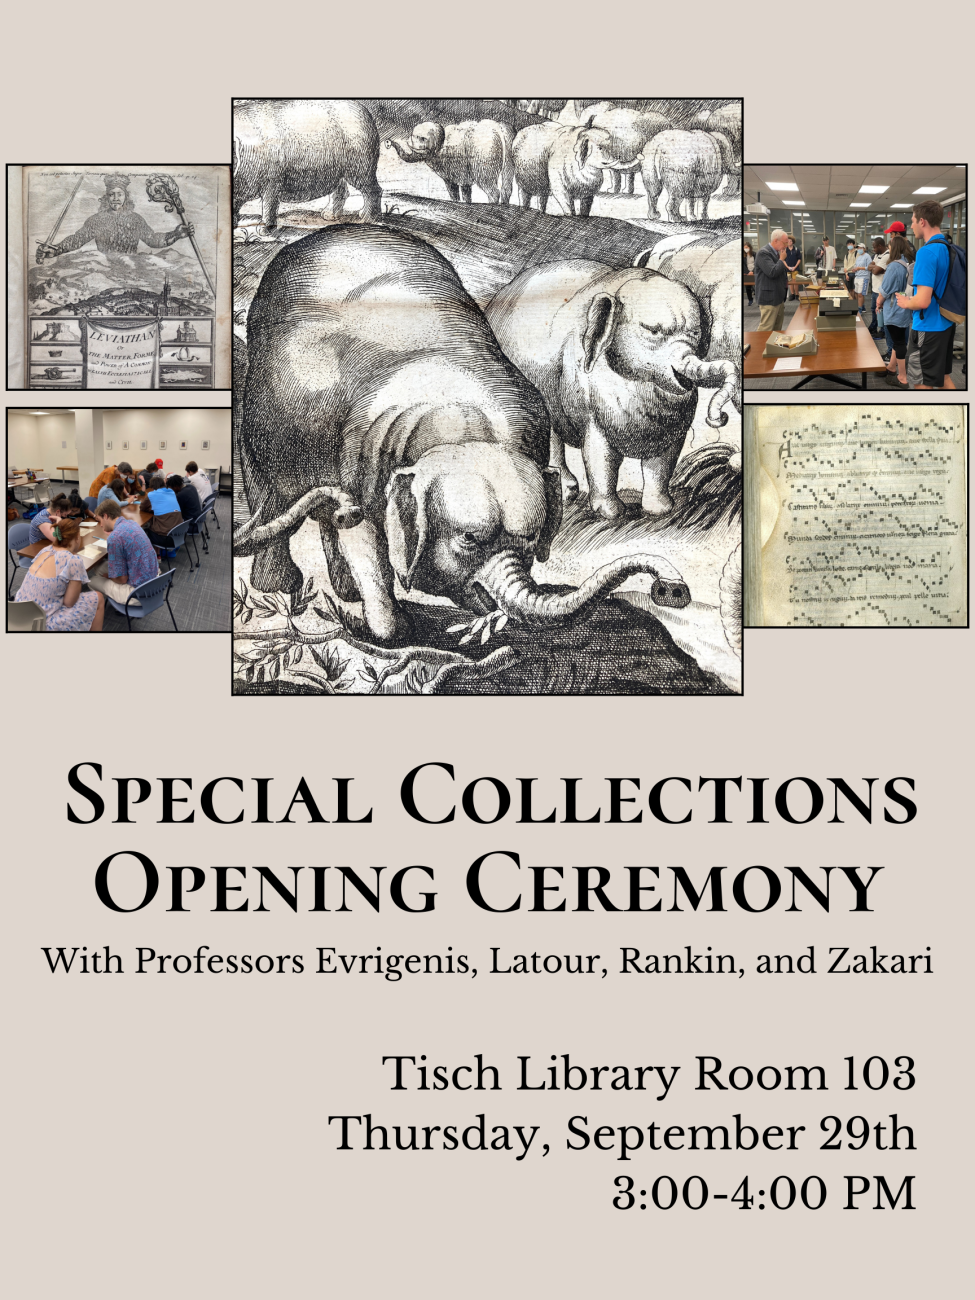 Special Collections Opening Ceremony: Tisch Library Room 103, Thursday, September 29th from 3:00-4:00 PM.